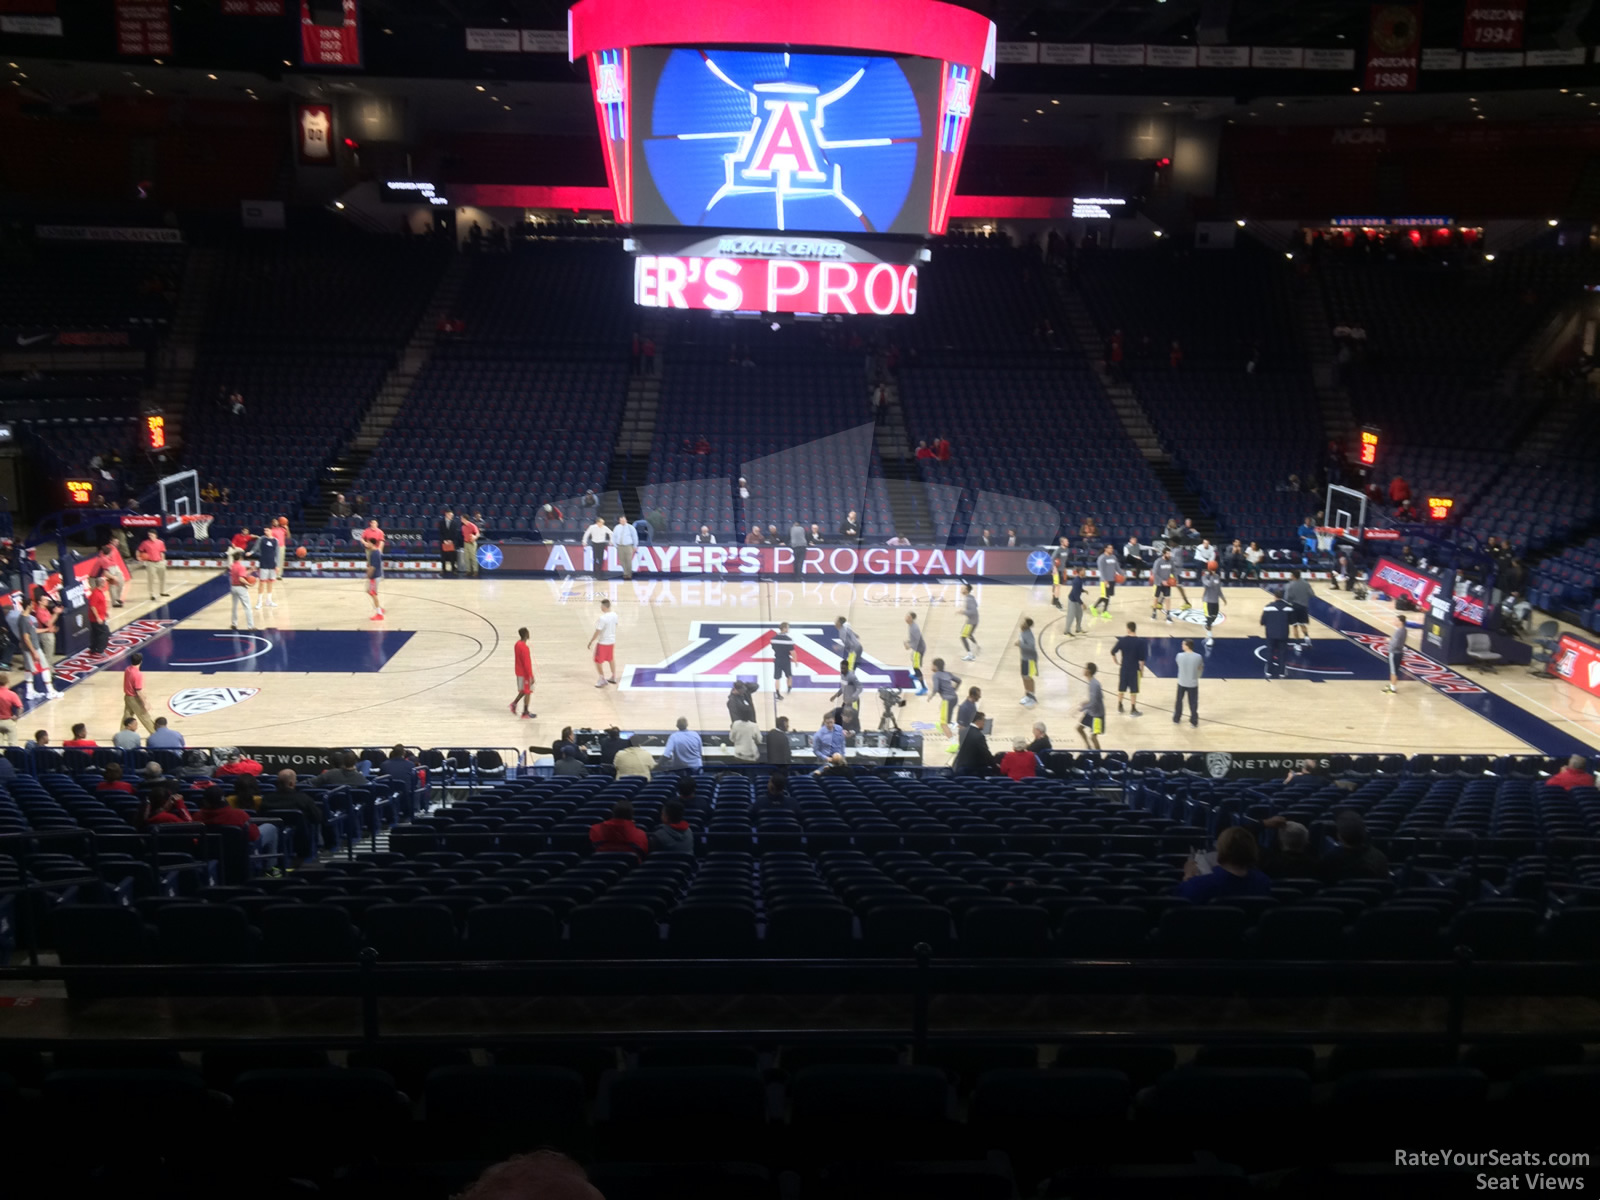 section 15, row 23 seat view  - mckale center